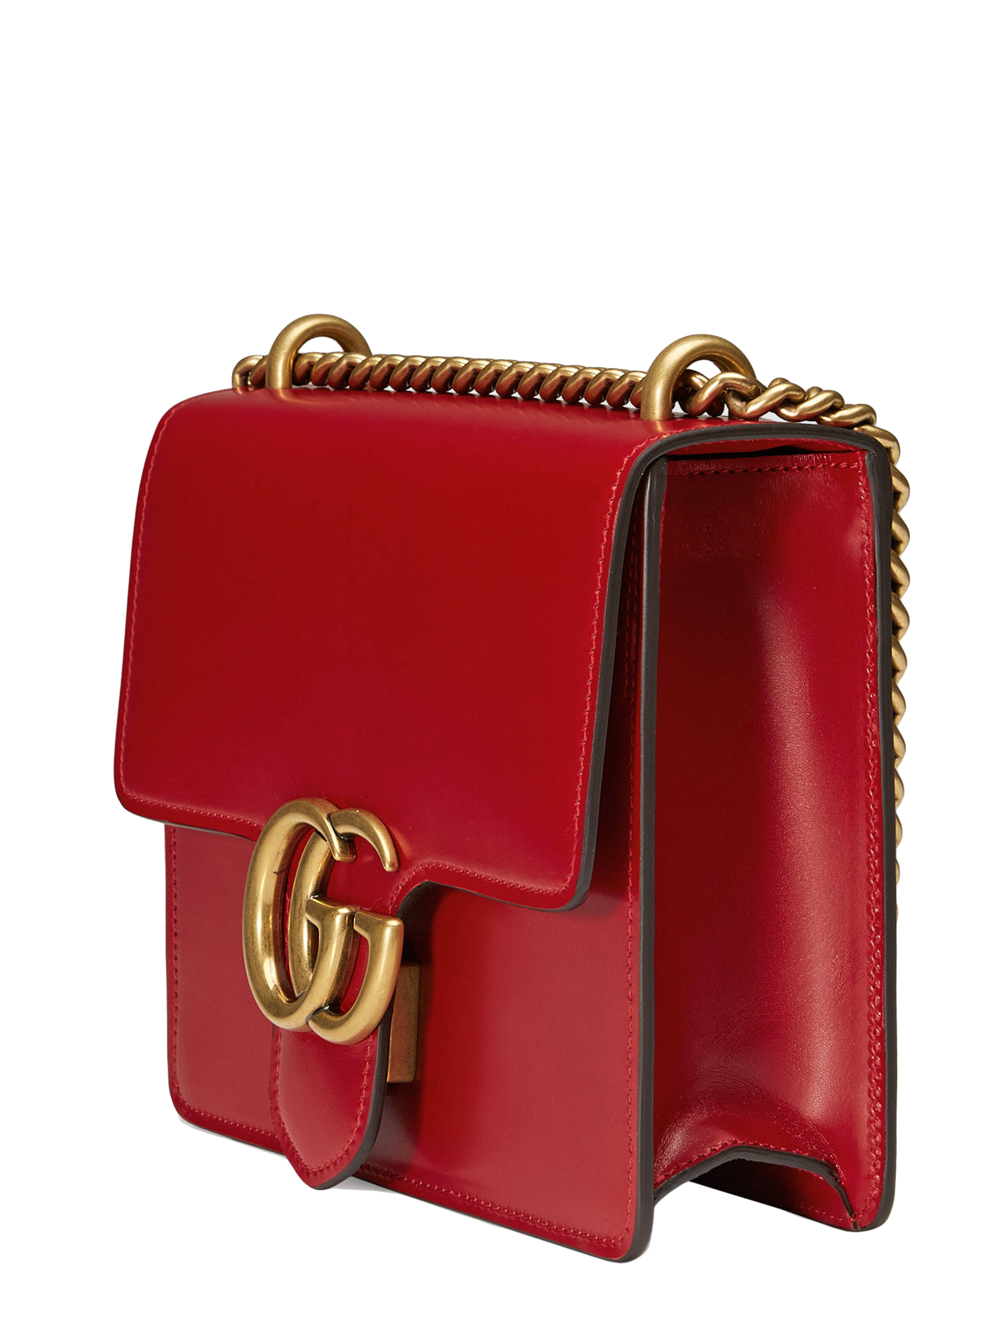 Lyst - Gucci Small Marmont Bag - Red in Red